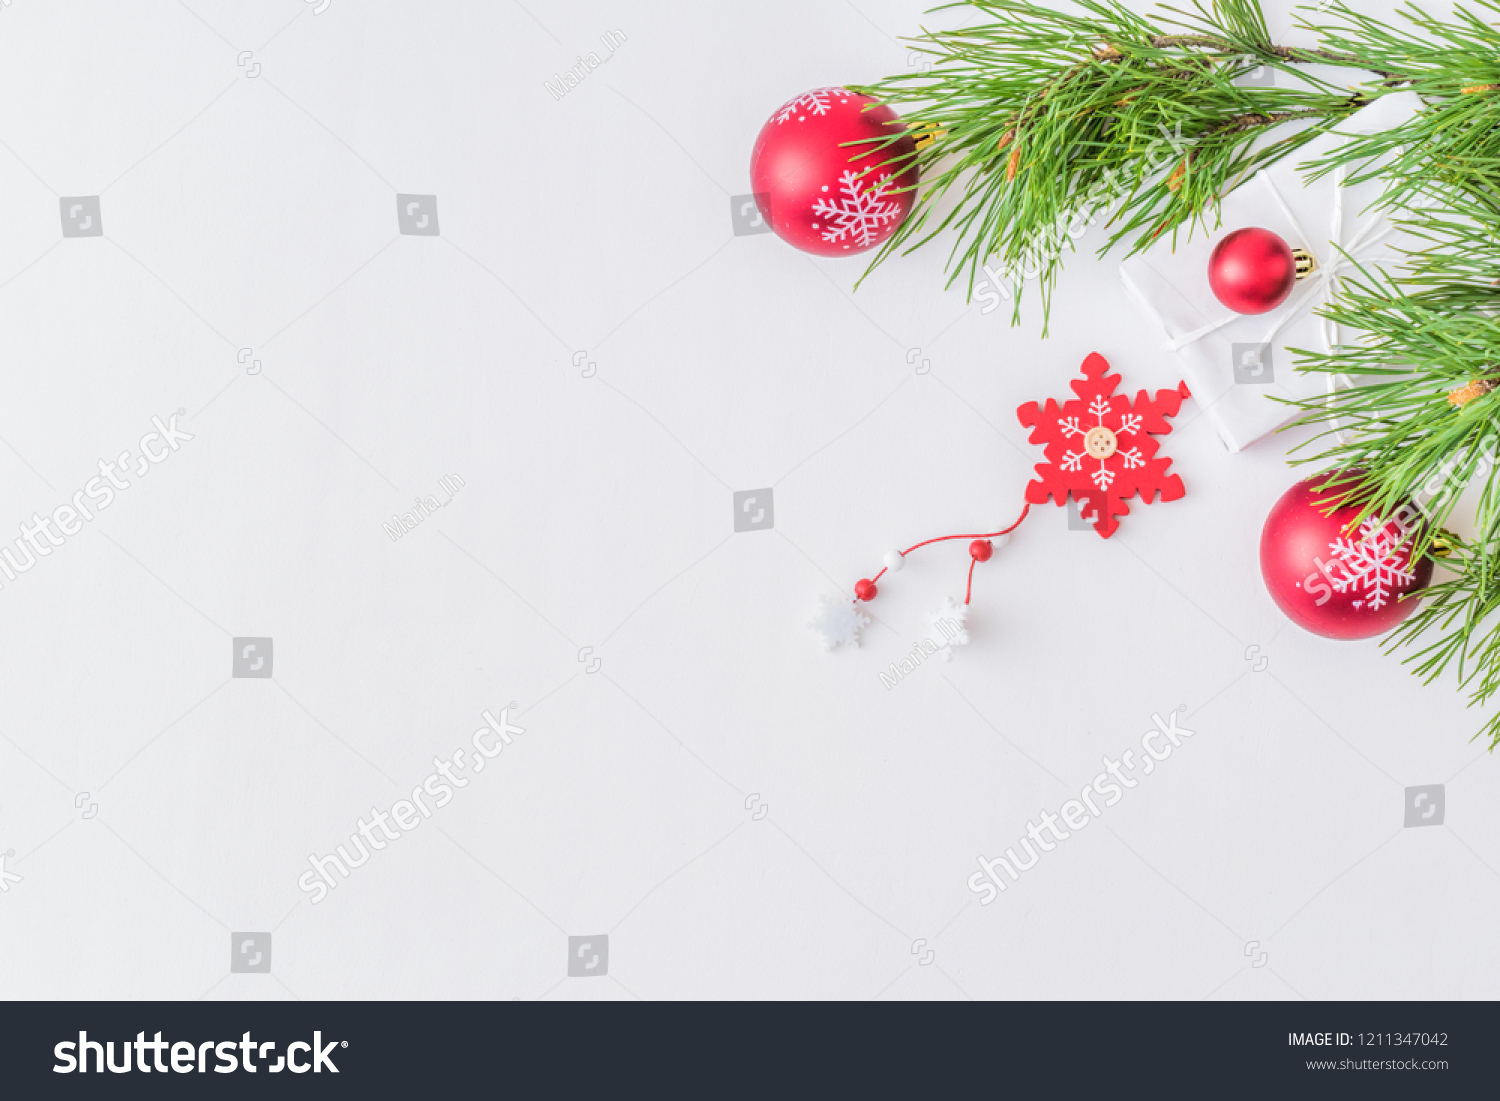 Holiday background with christmas branches and decoration on a light background #1211347042